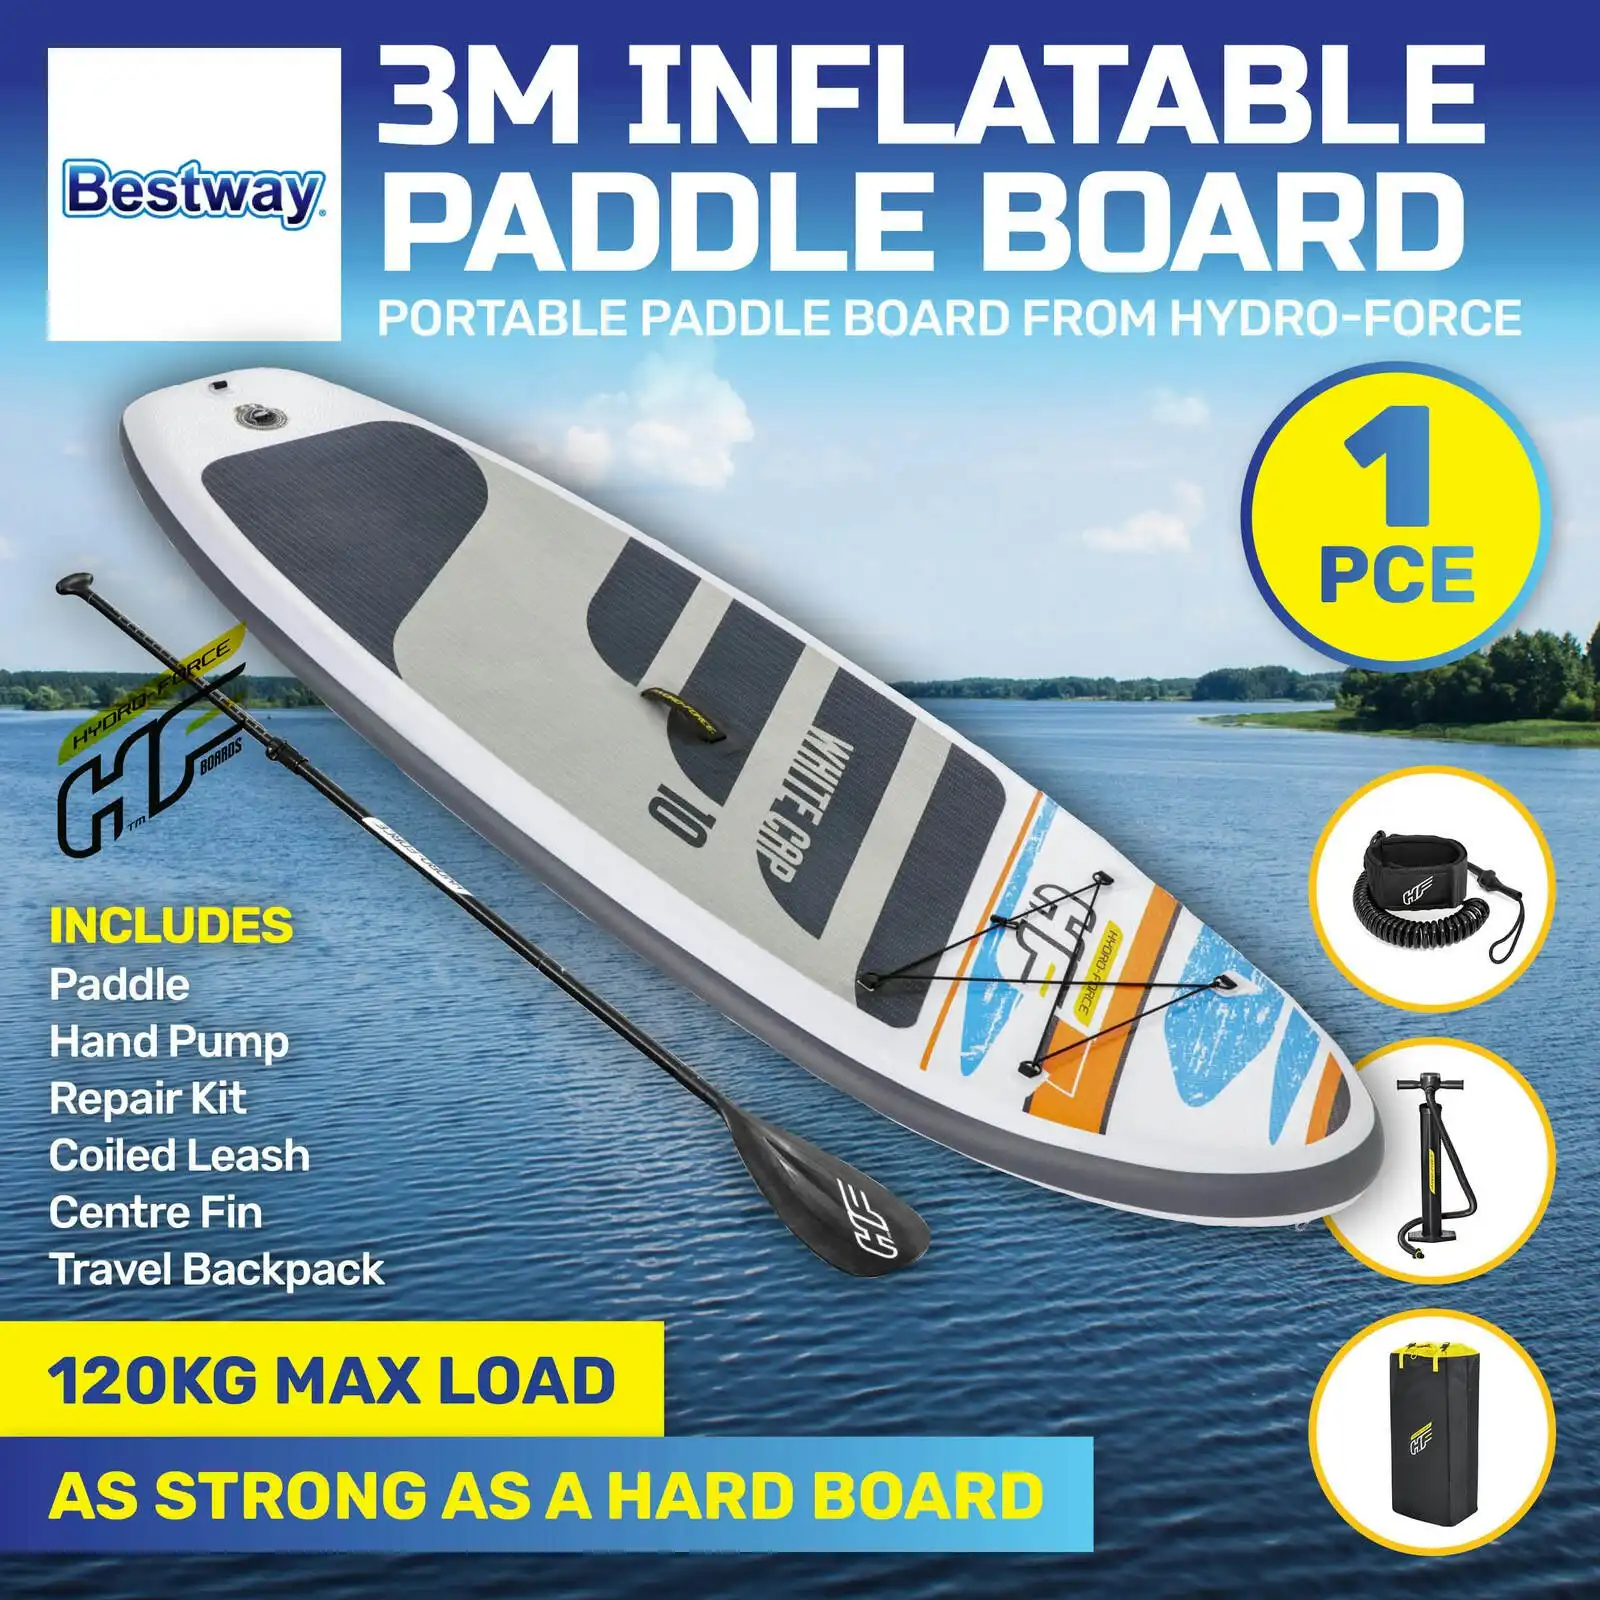 Bestway 3m Paddle Board Inflatable Essentials Included Innovative Technology